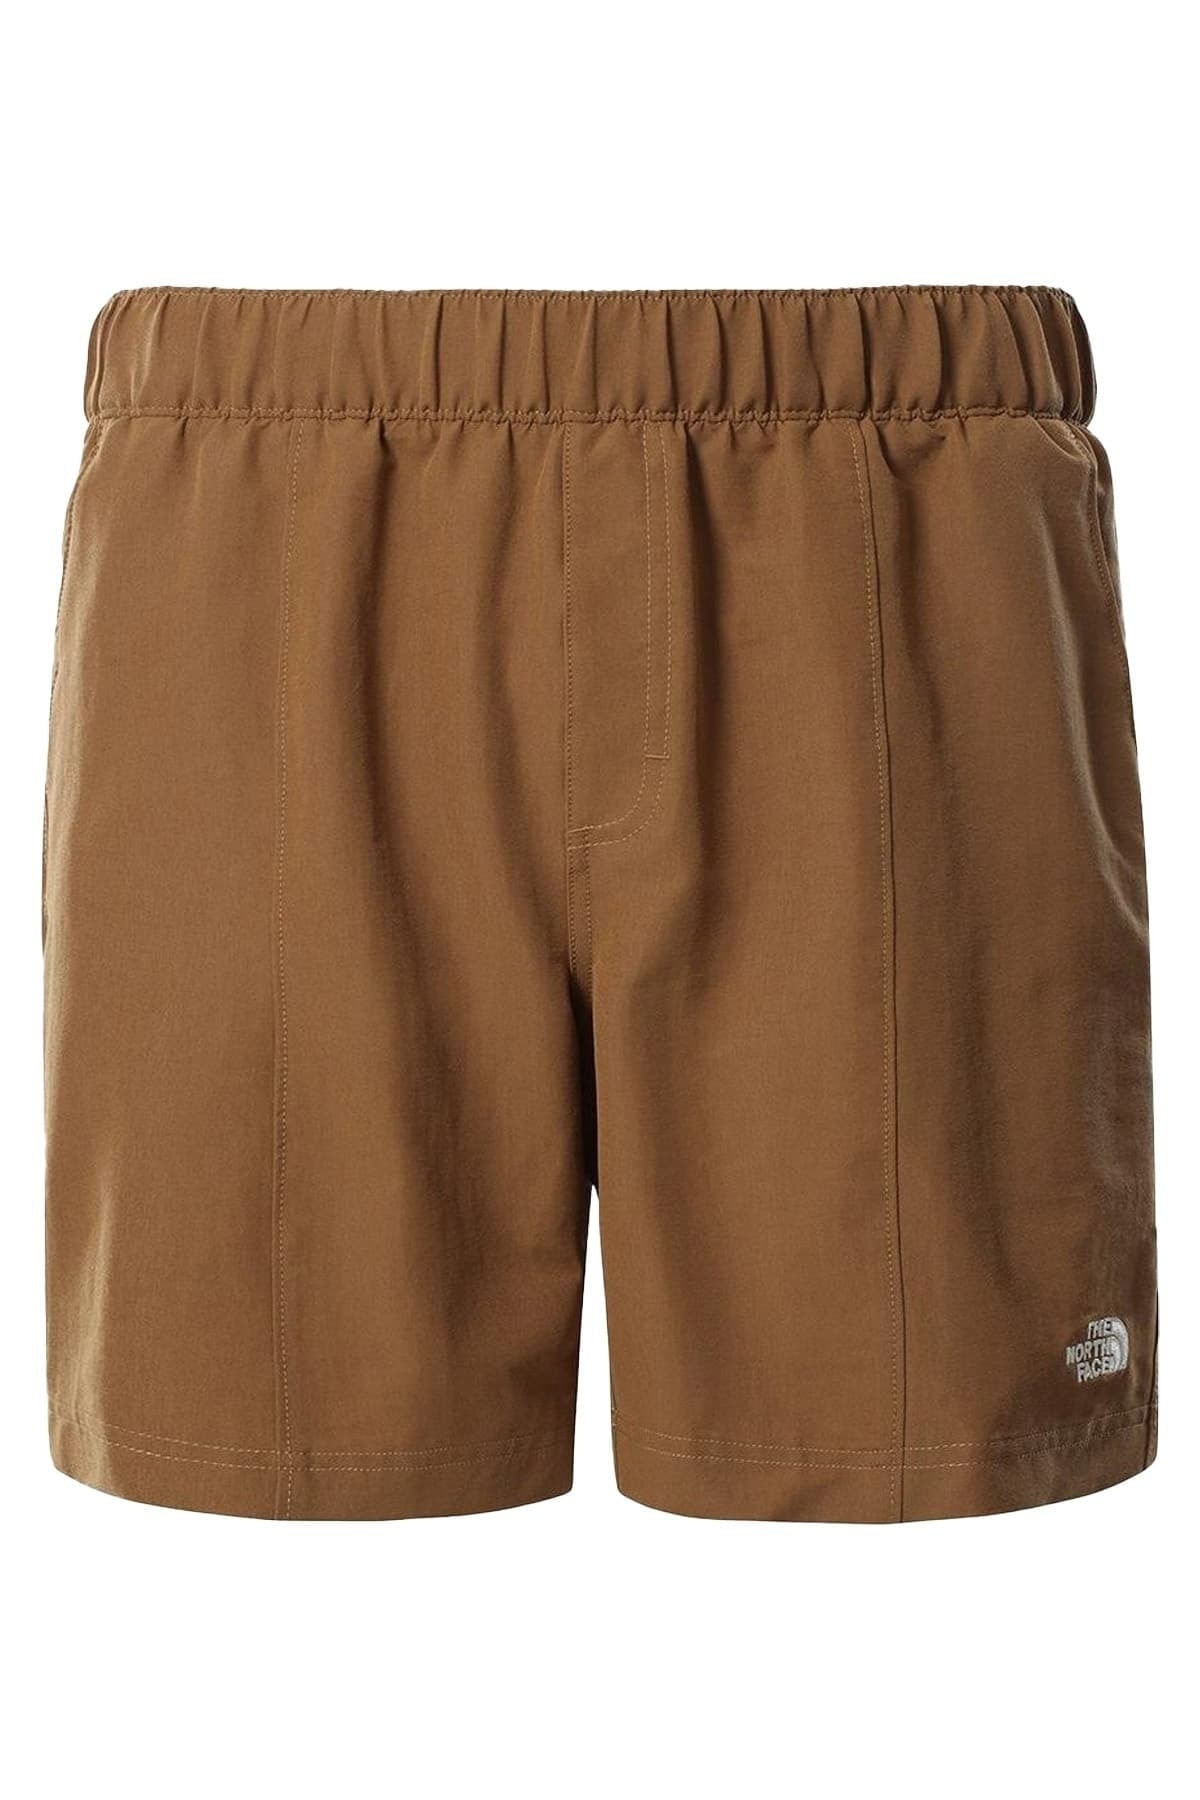 THE NORTH FACE Class V Pull On Erkek Short - Nf0a5a5x